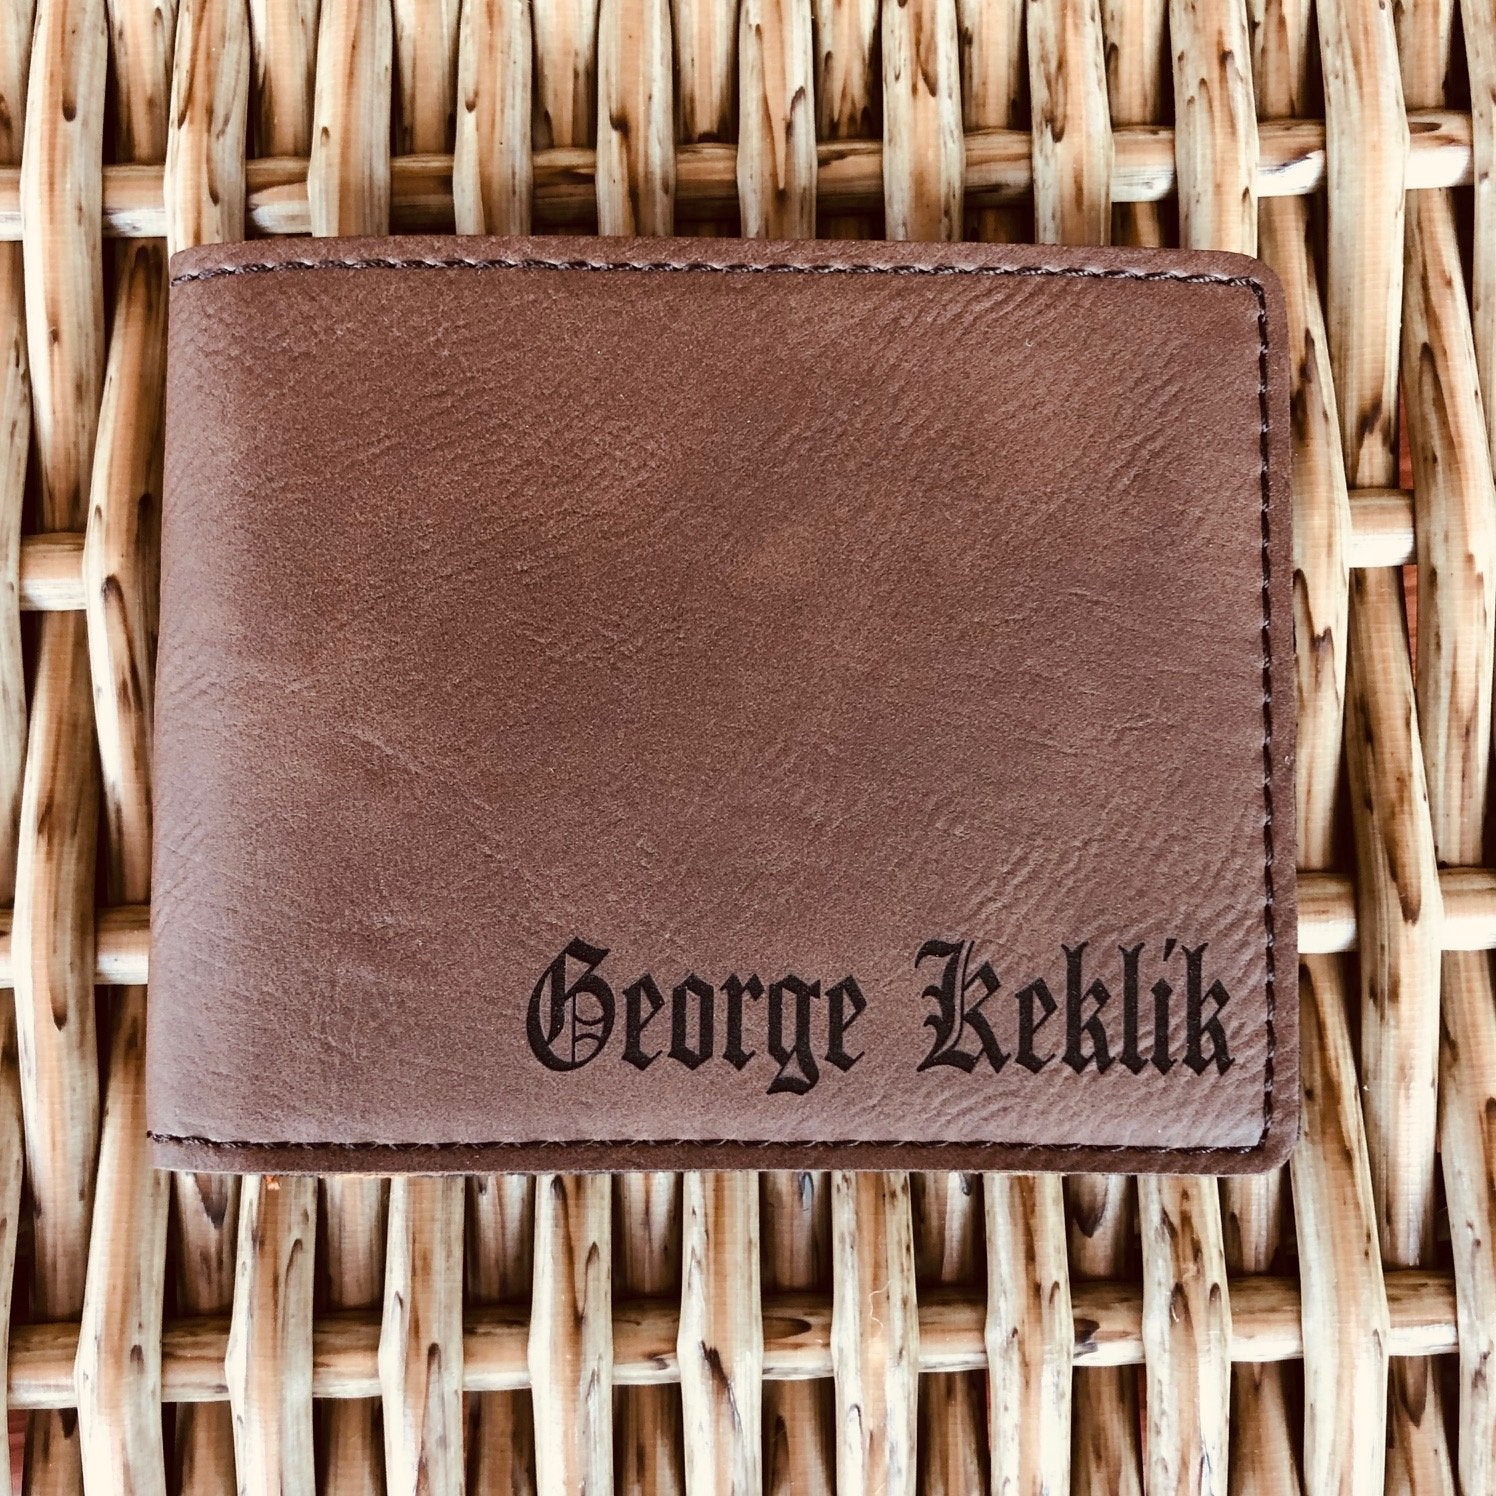 Groovy Guy Gifts Personalized Leather Money Clip Wallet